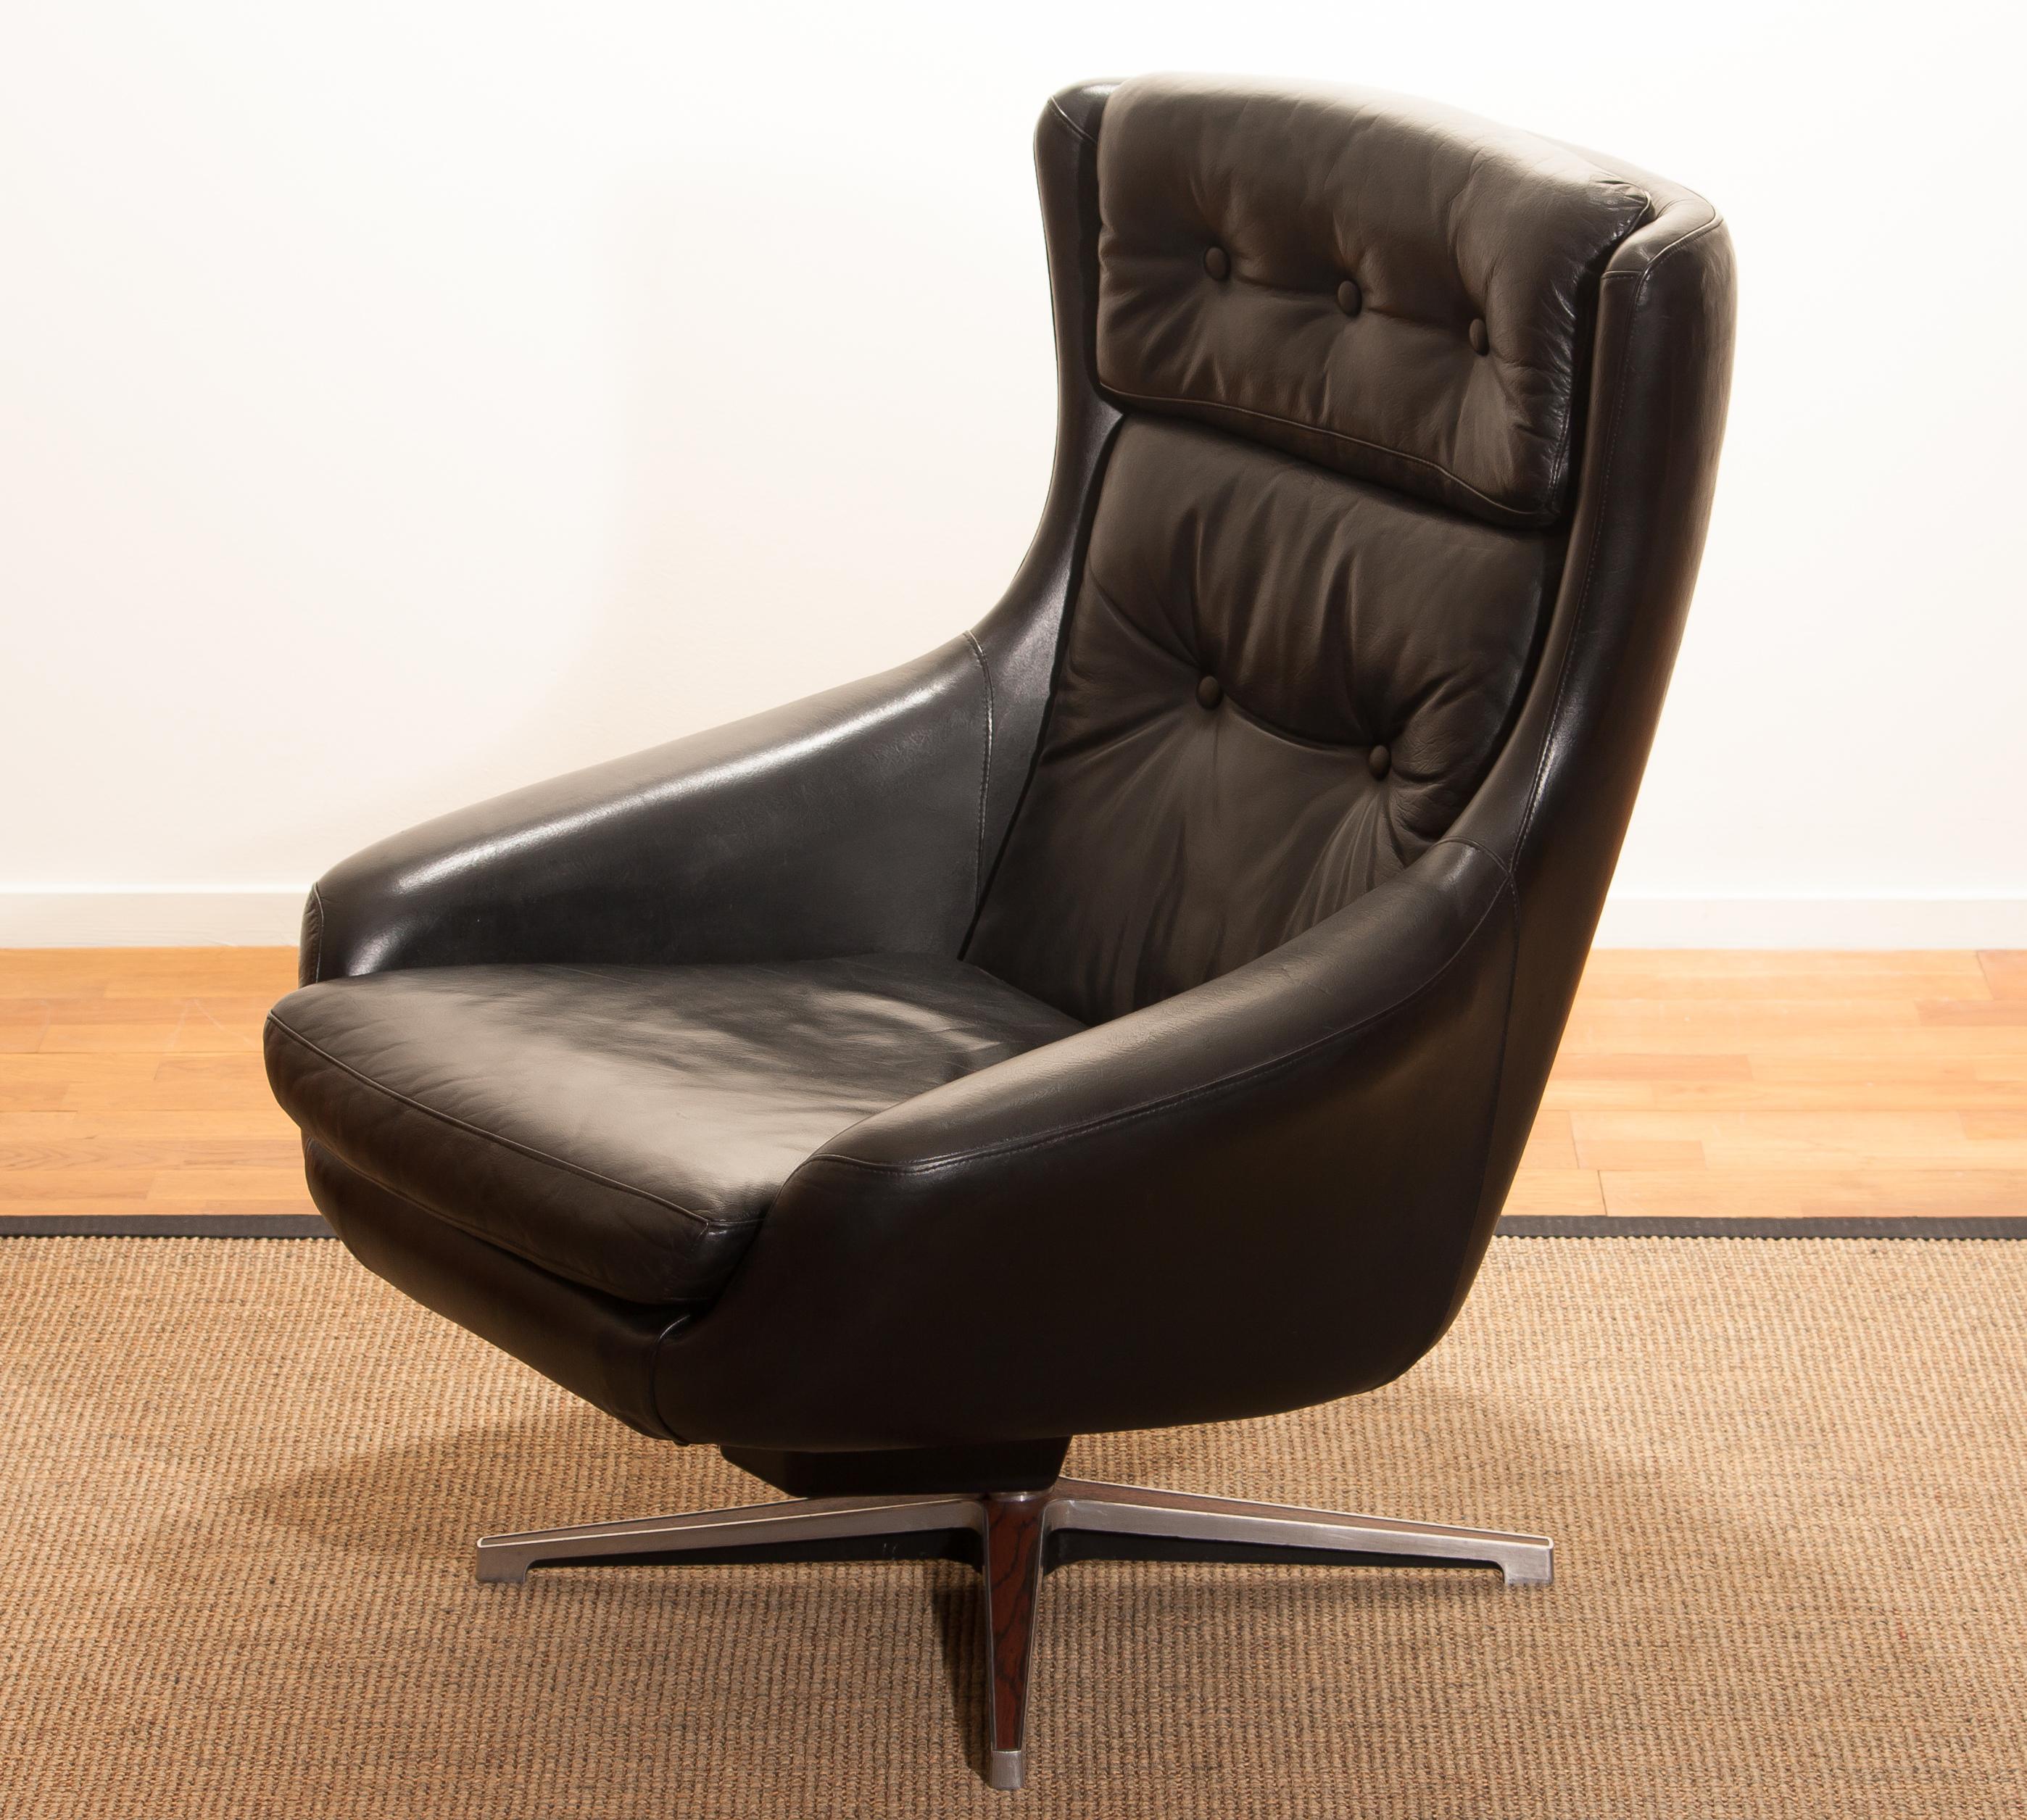 1960s, Black Leather Swivel Rocking Lounge Chair by Lennart Bender In Excellent Condition In Silvolde, Gelderland